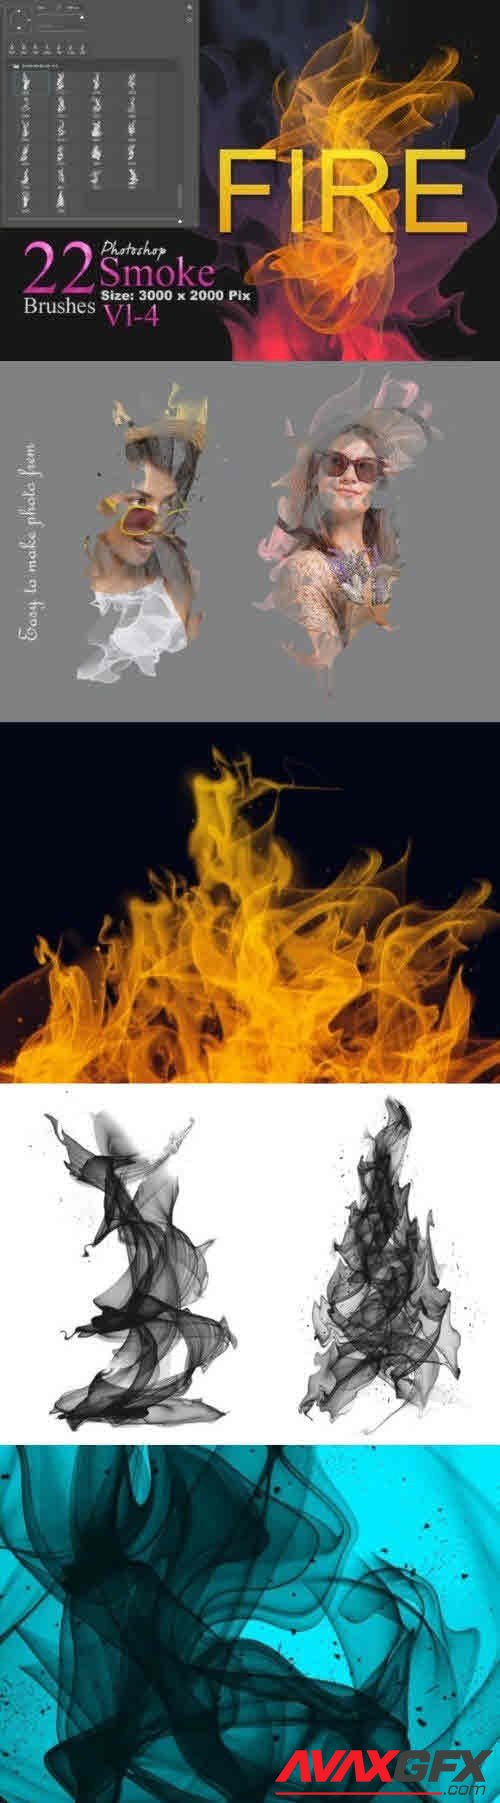 Fire and Smoke Photoshop Brushes - 3680876